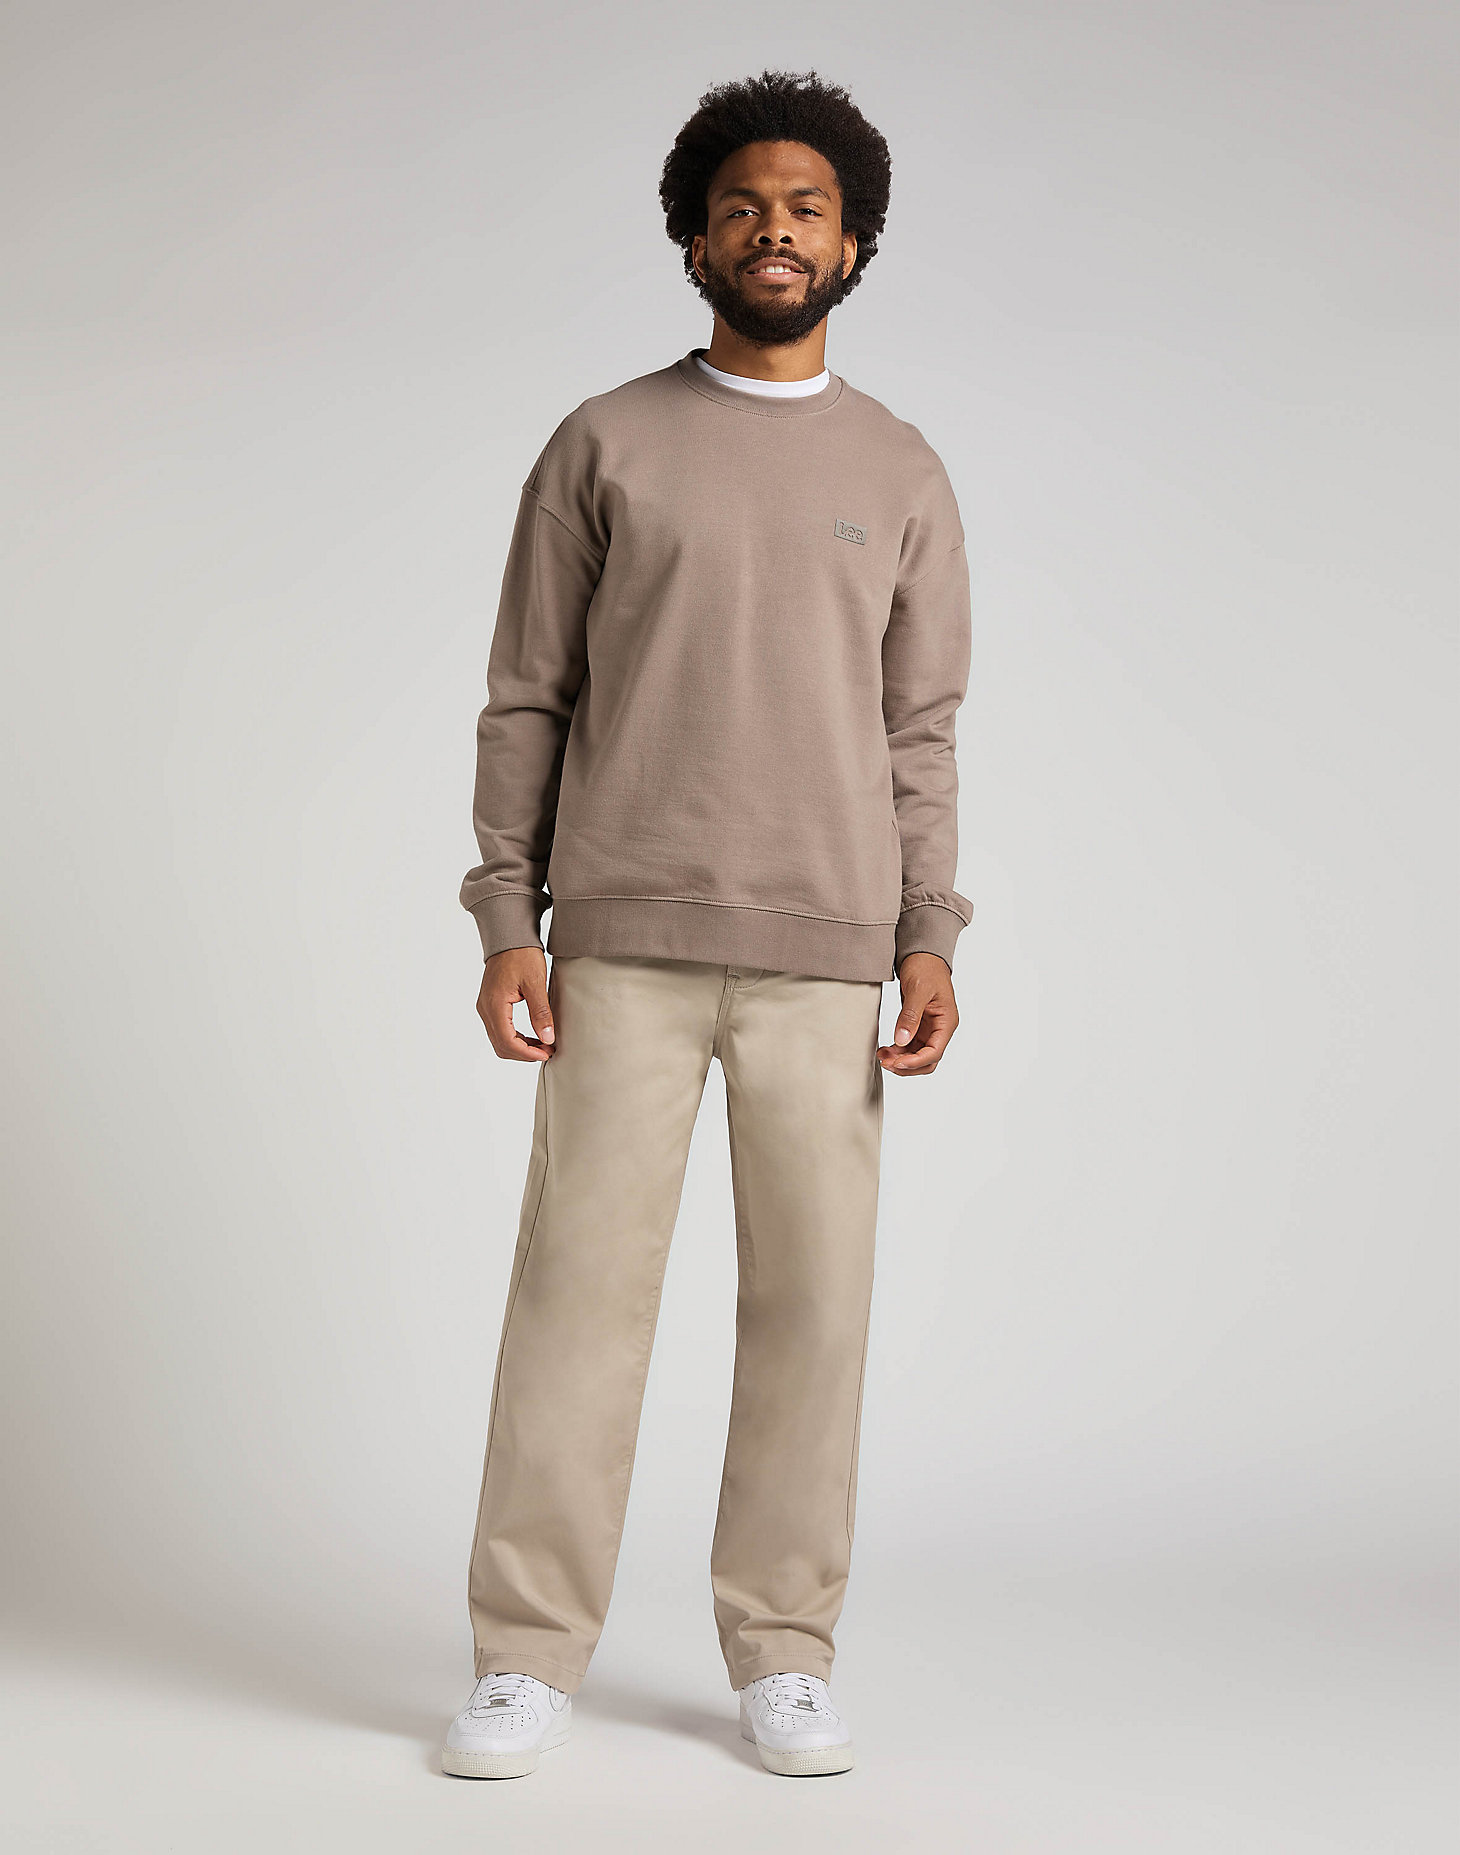 Relaxed Chino in Stone alternative view 2